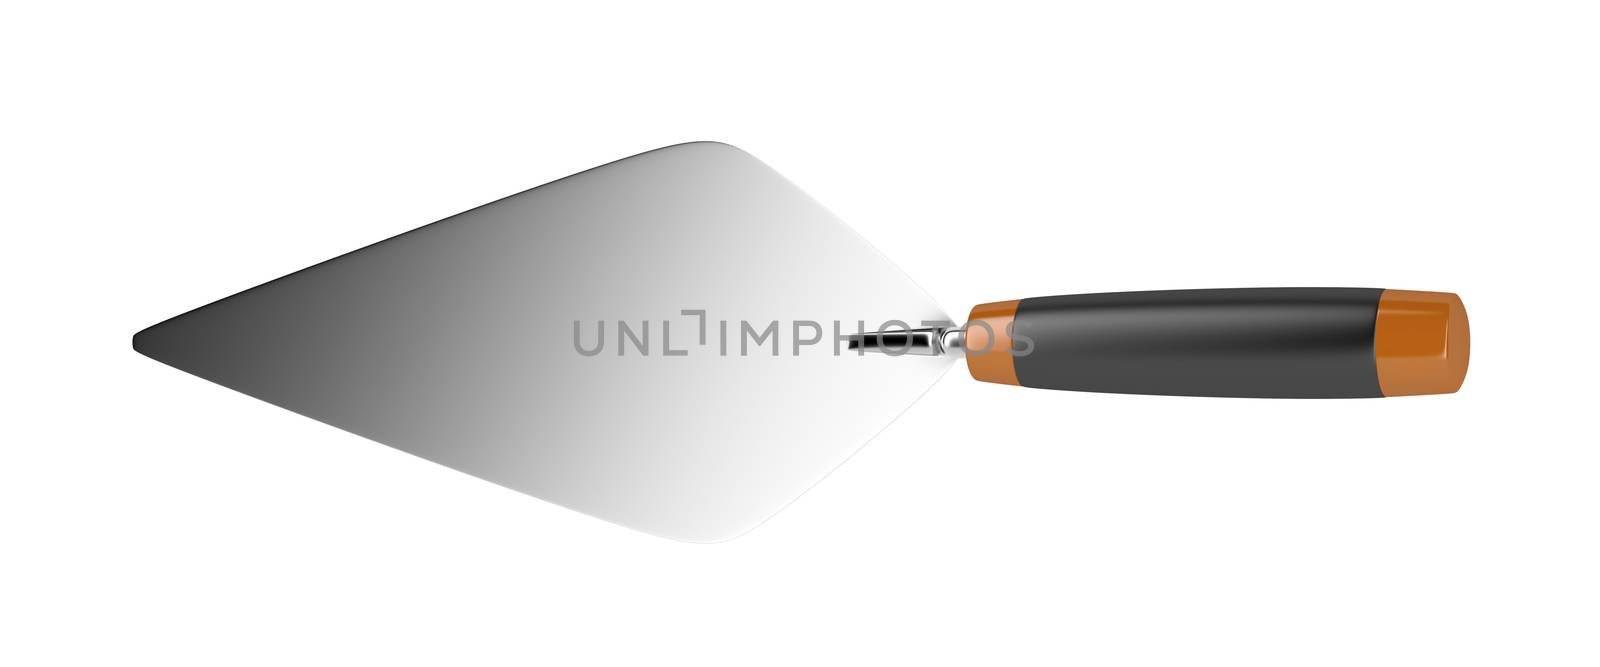 Trowel by magraphics